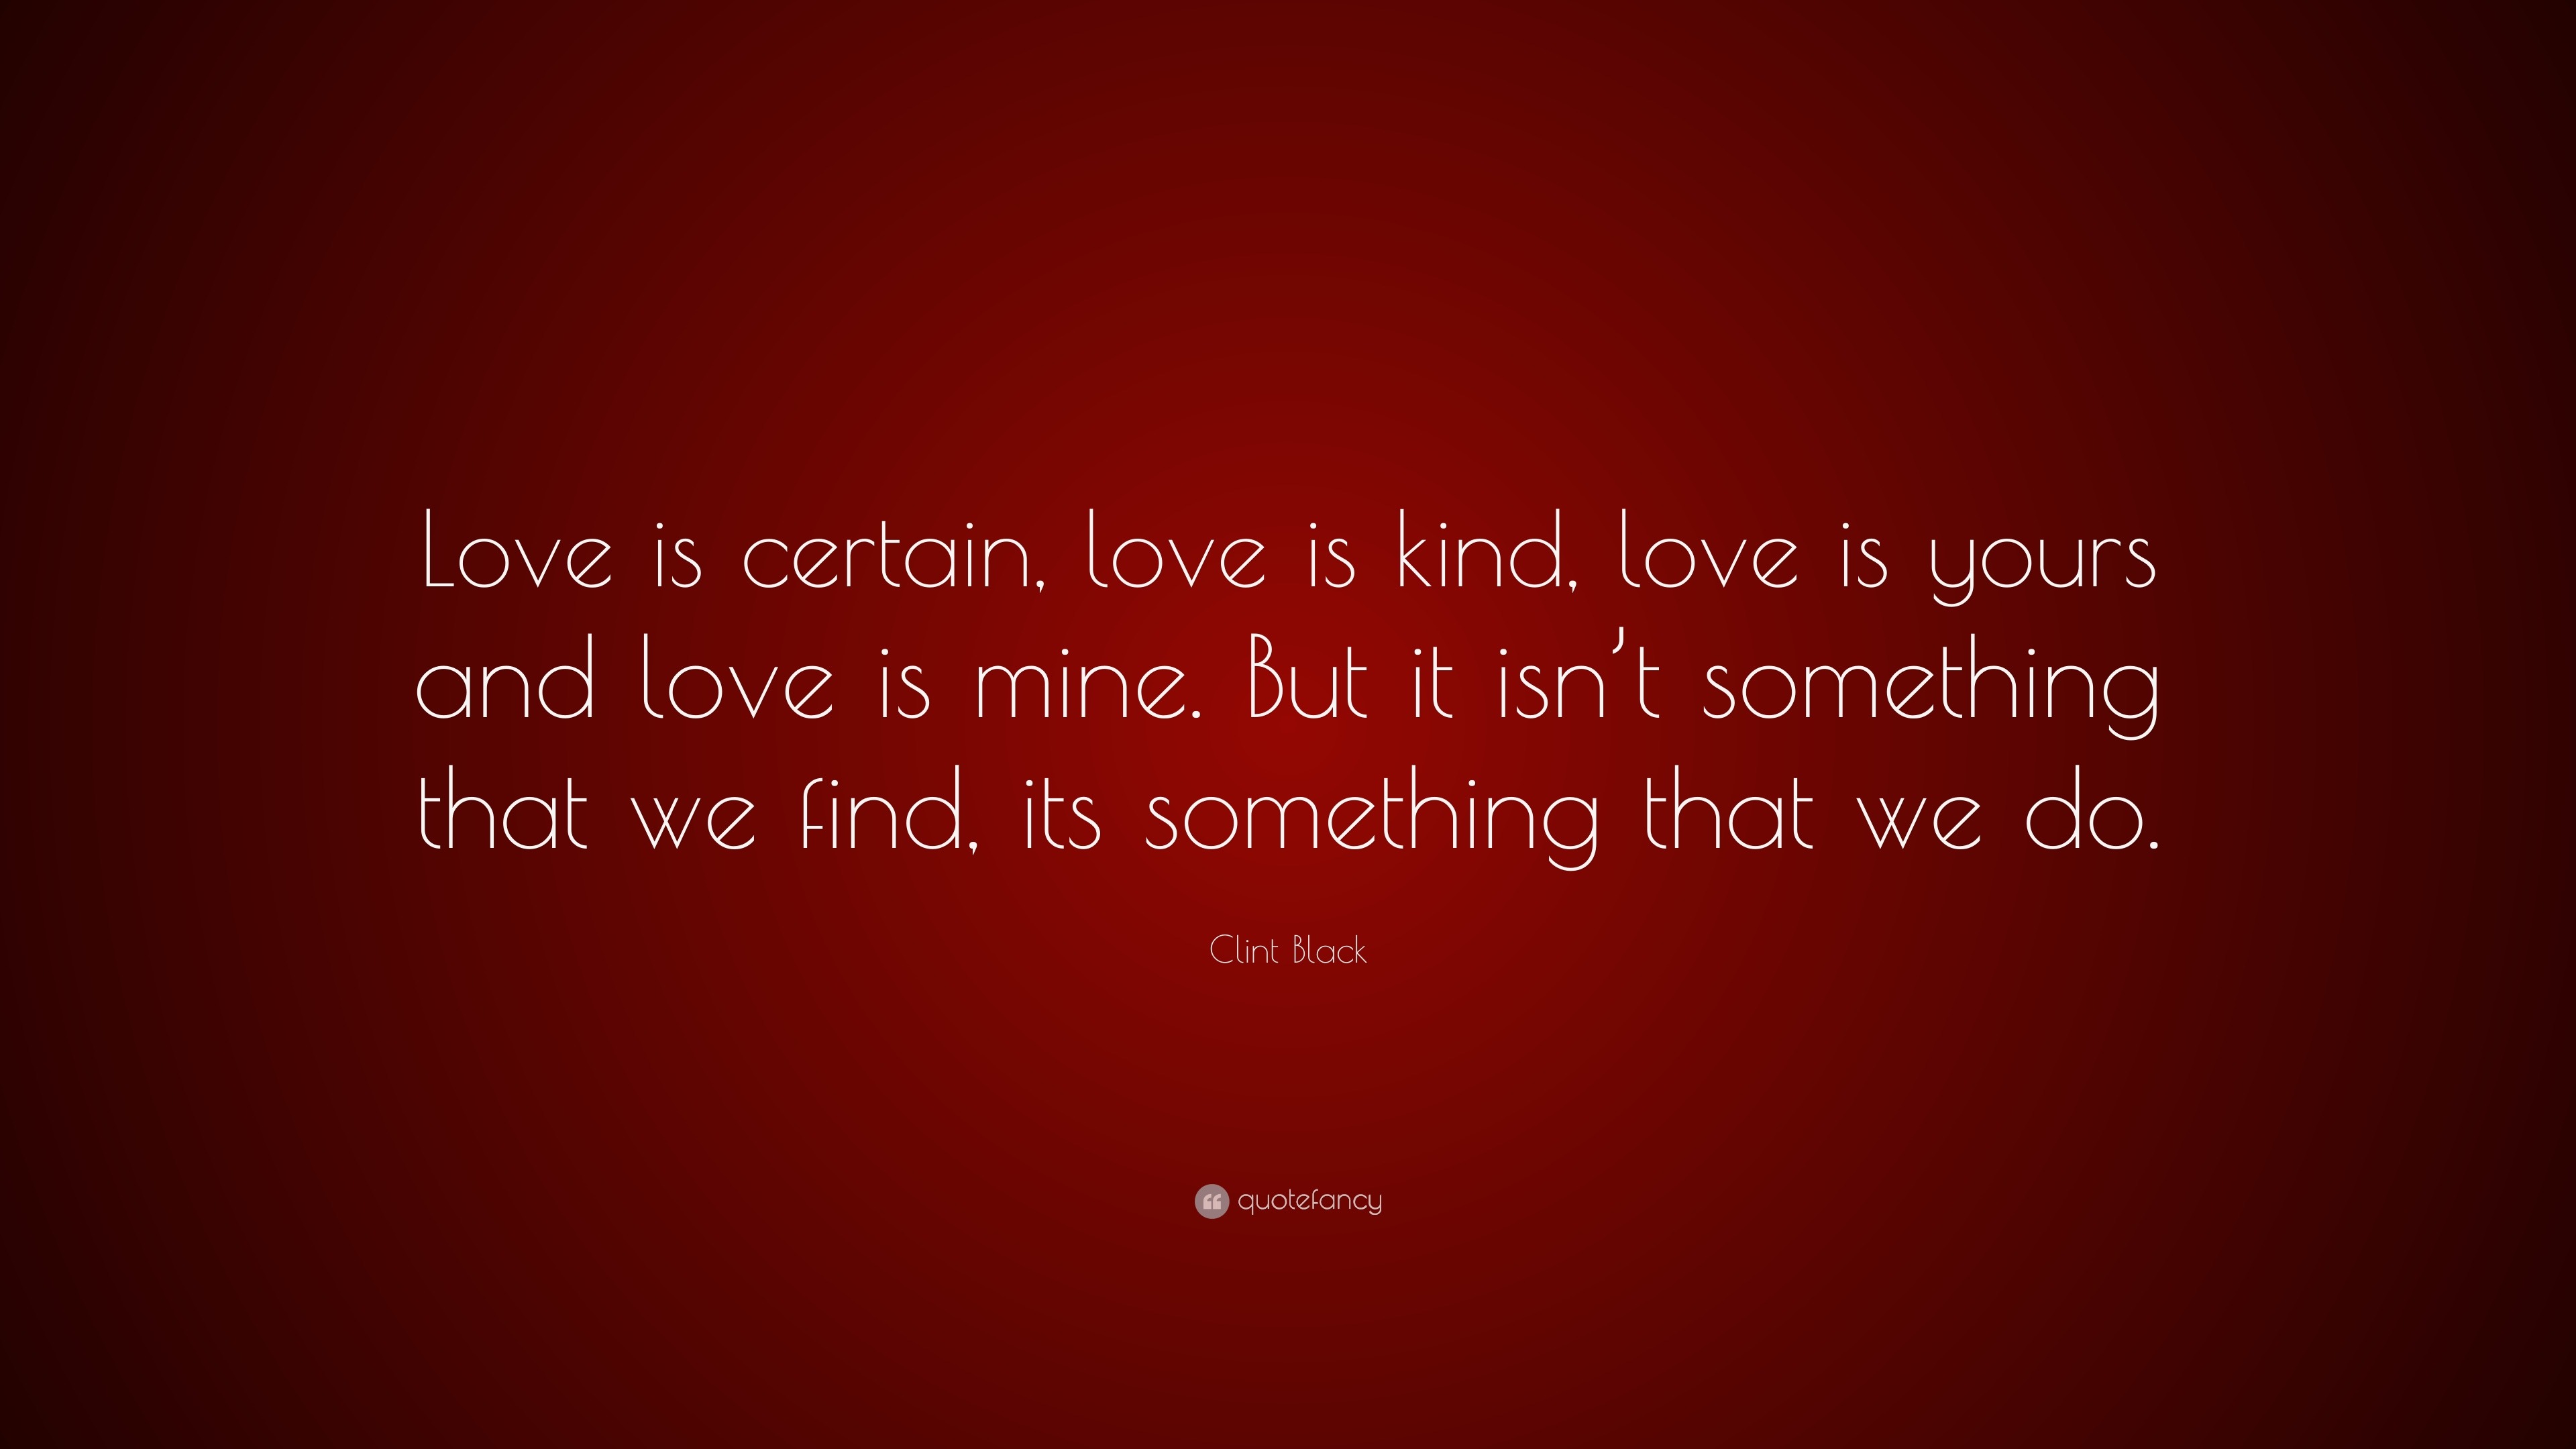 Clint Black Quote “Love is certain love is kind love is yours